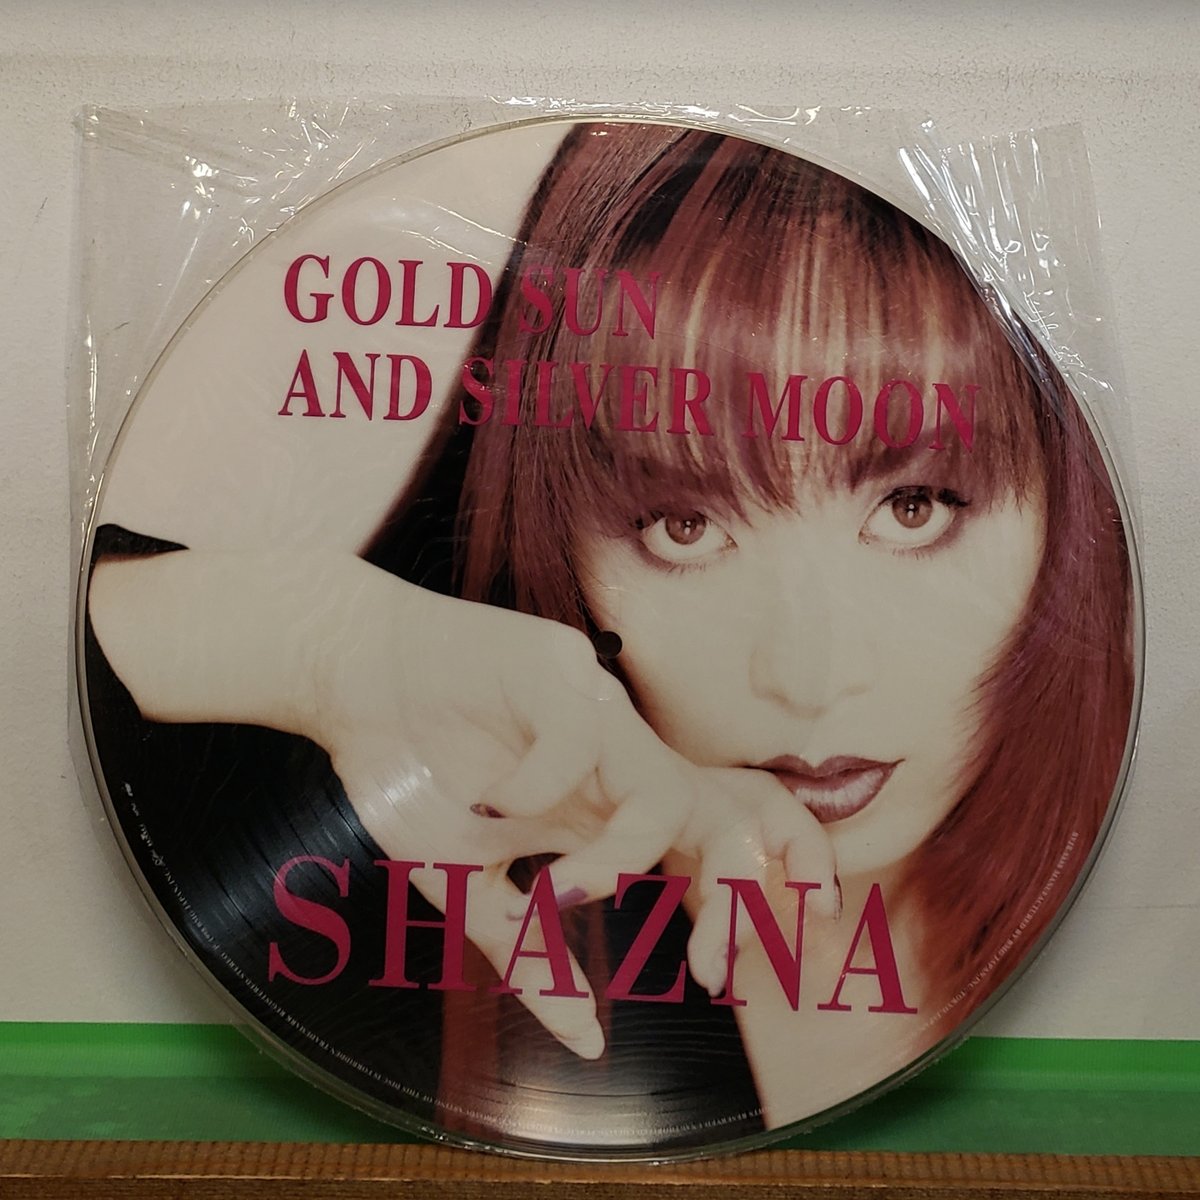 (LP)SHAZNA / GOLD SUN AND SILVER MOON 1998 完全限定 新品未使用デッドストック発見